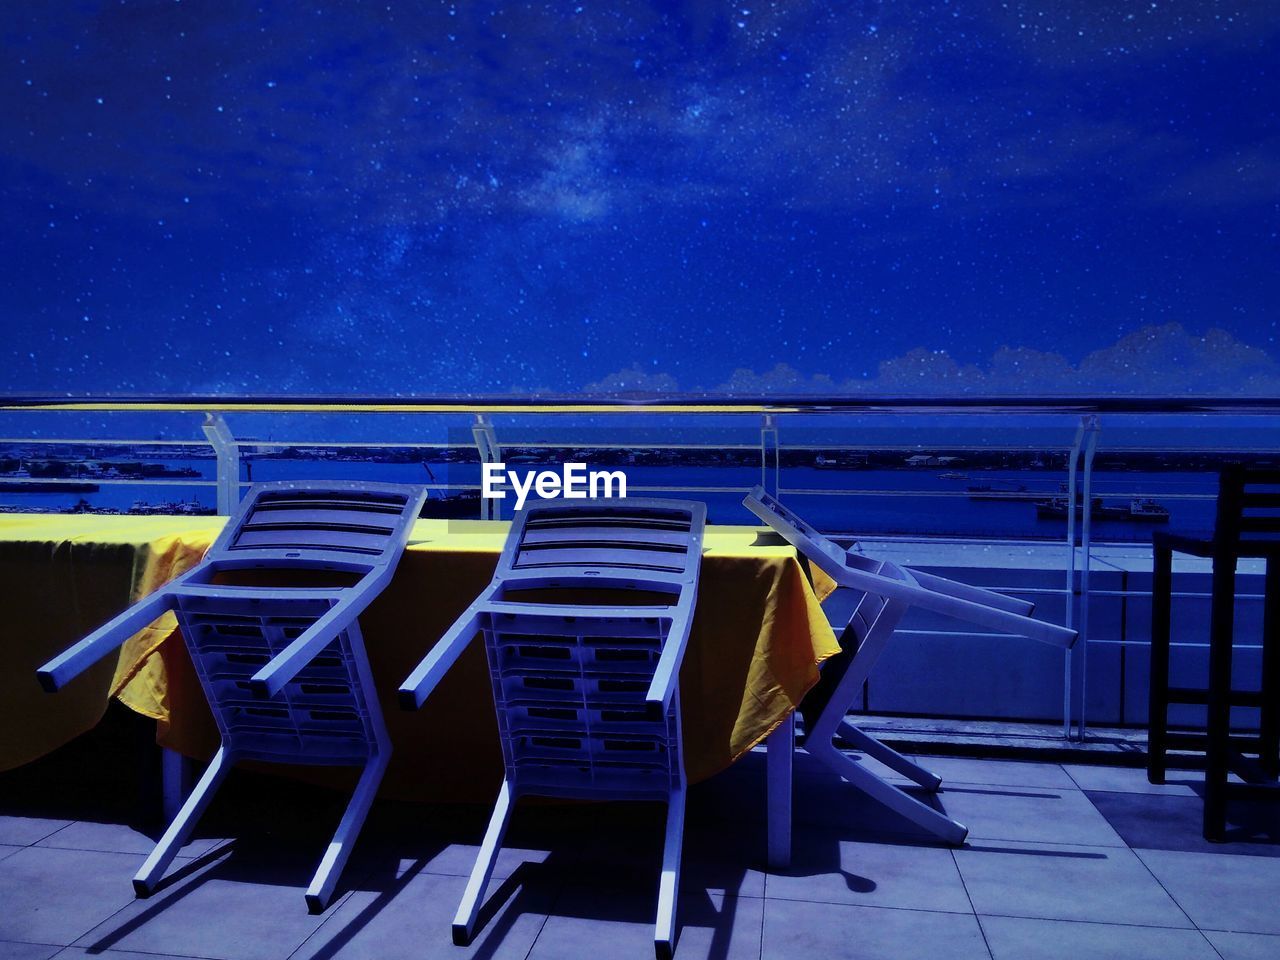 Furniture at observation point against sky at night